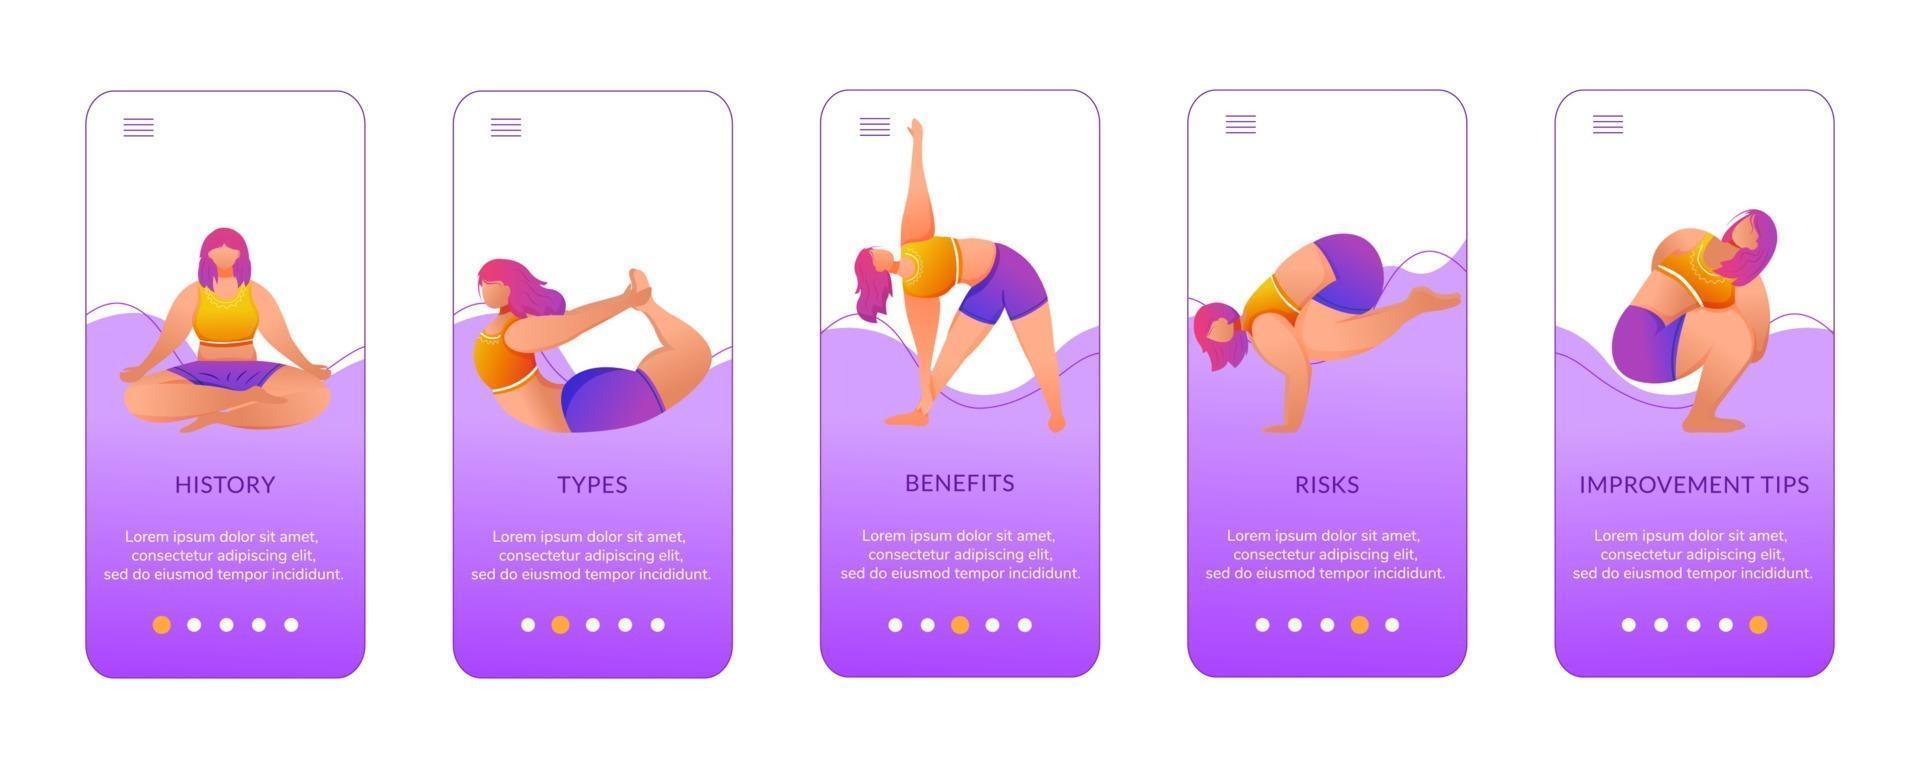 Yoga benefits onboarding mobile app screen vector template. Exercises and poses. Bodypositive female. Walkthrough website steps with flat characters. UX, UI, GUI smartphone cartoon interface concept